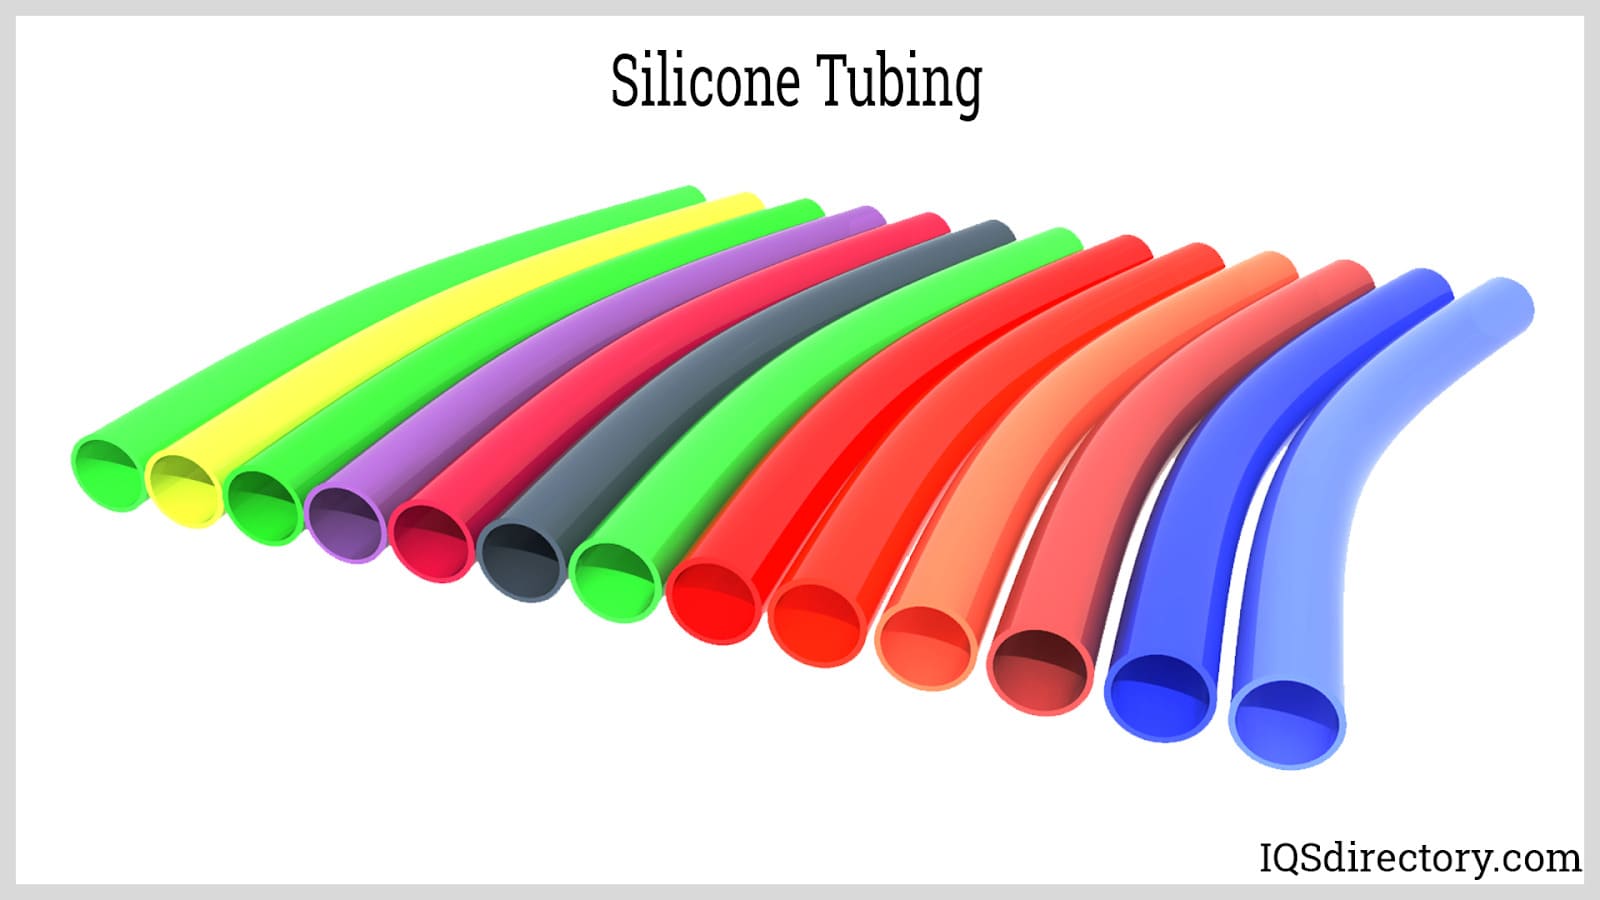 Silicone Tubing: Principle, Types, Applications, and Benefits